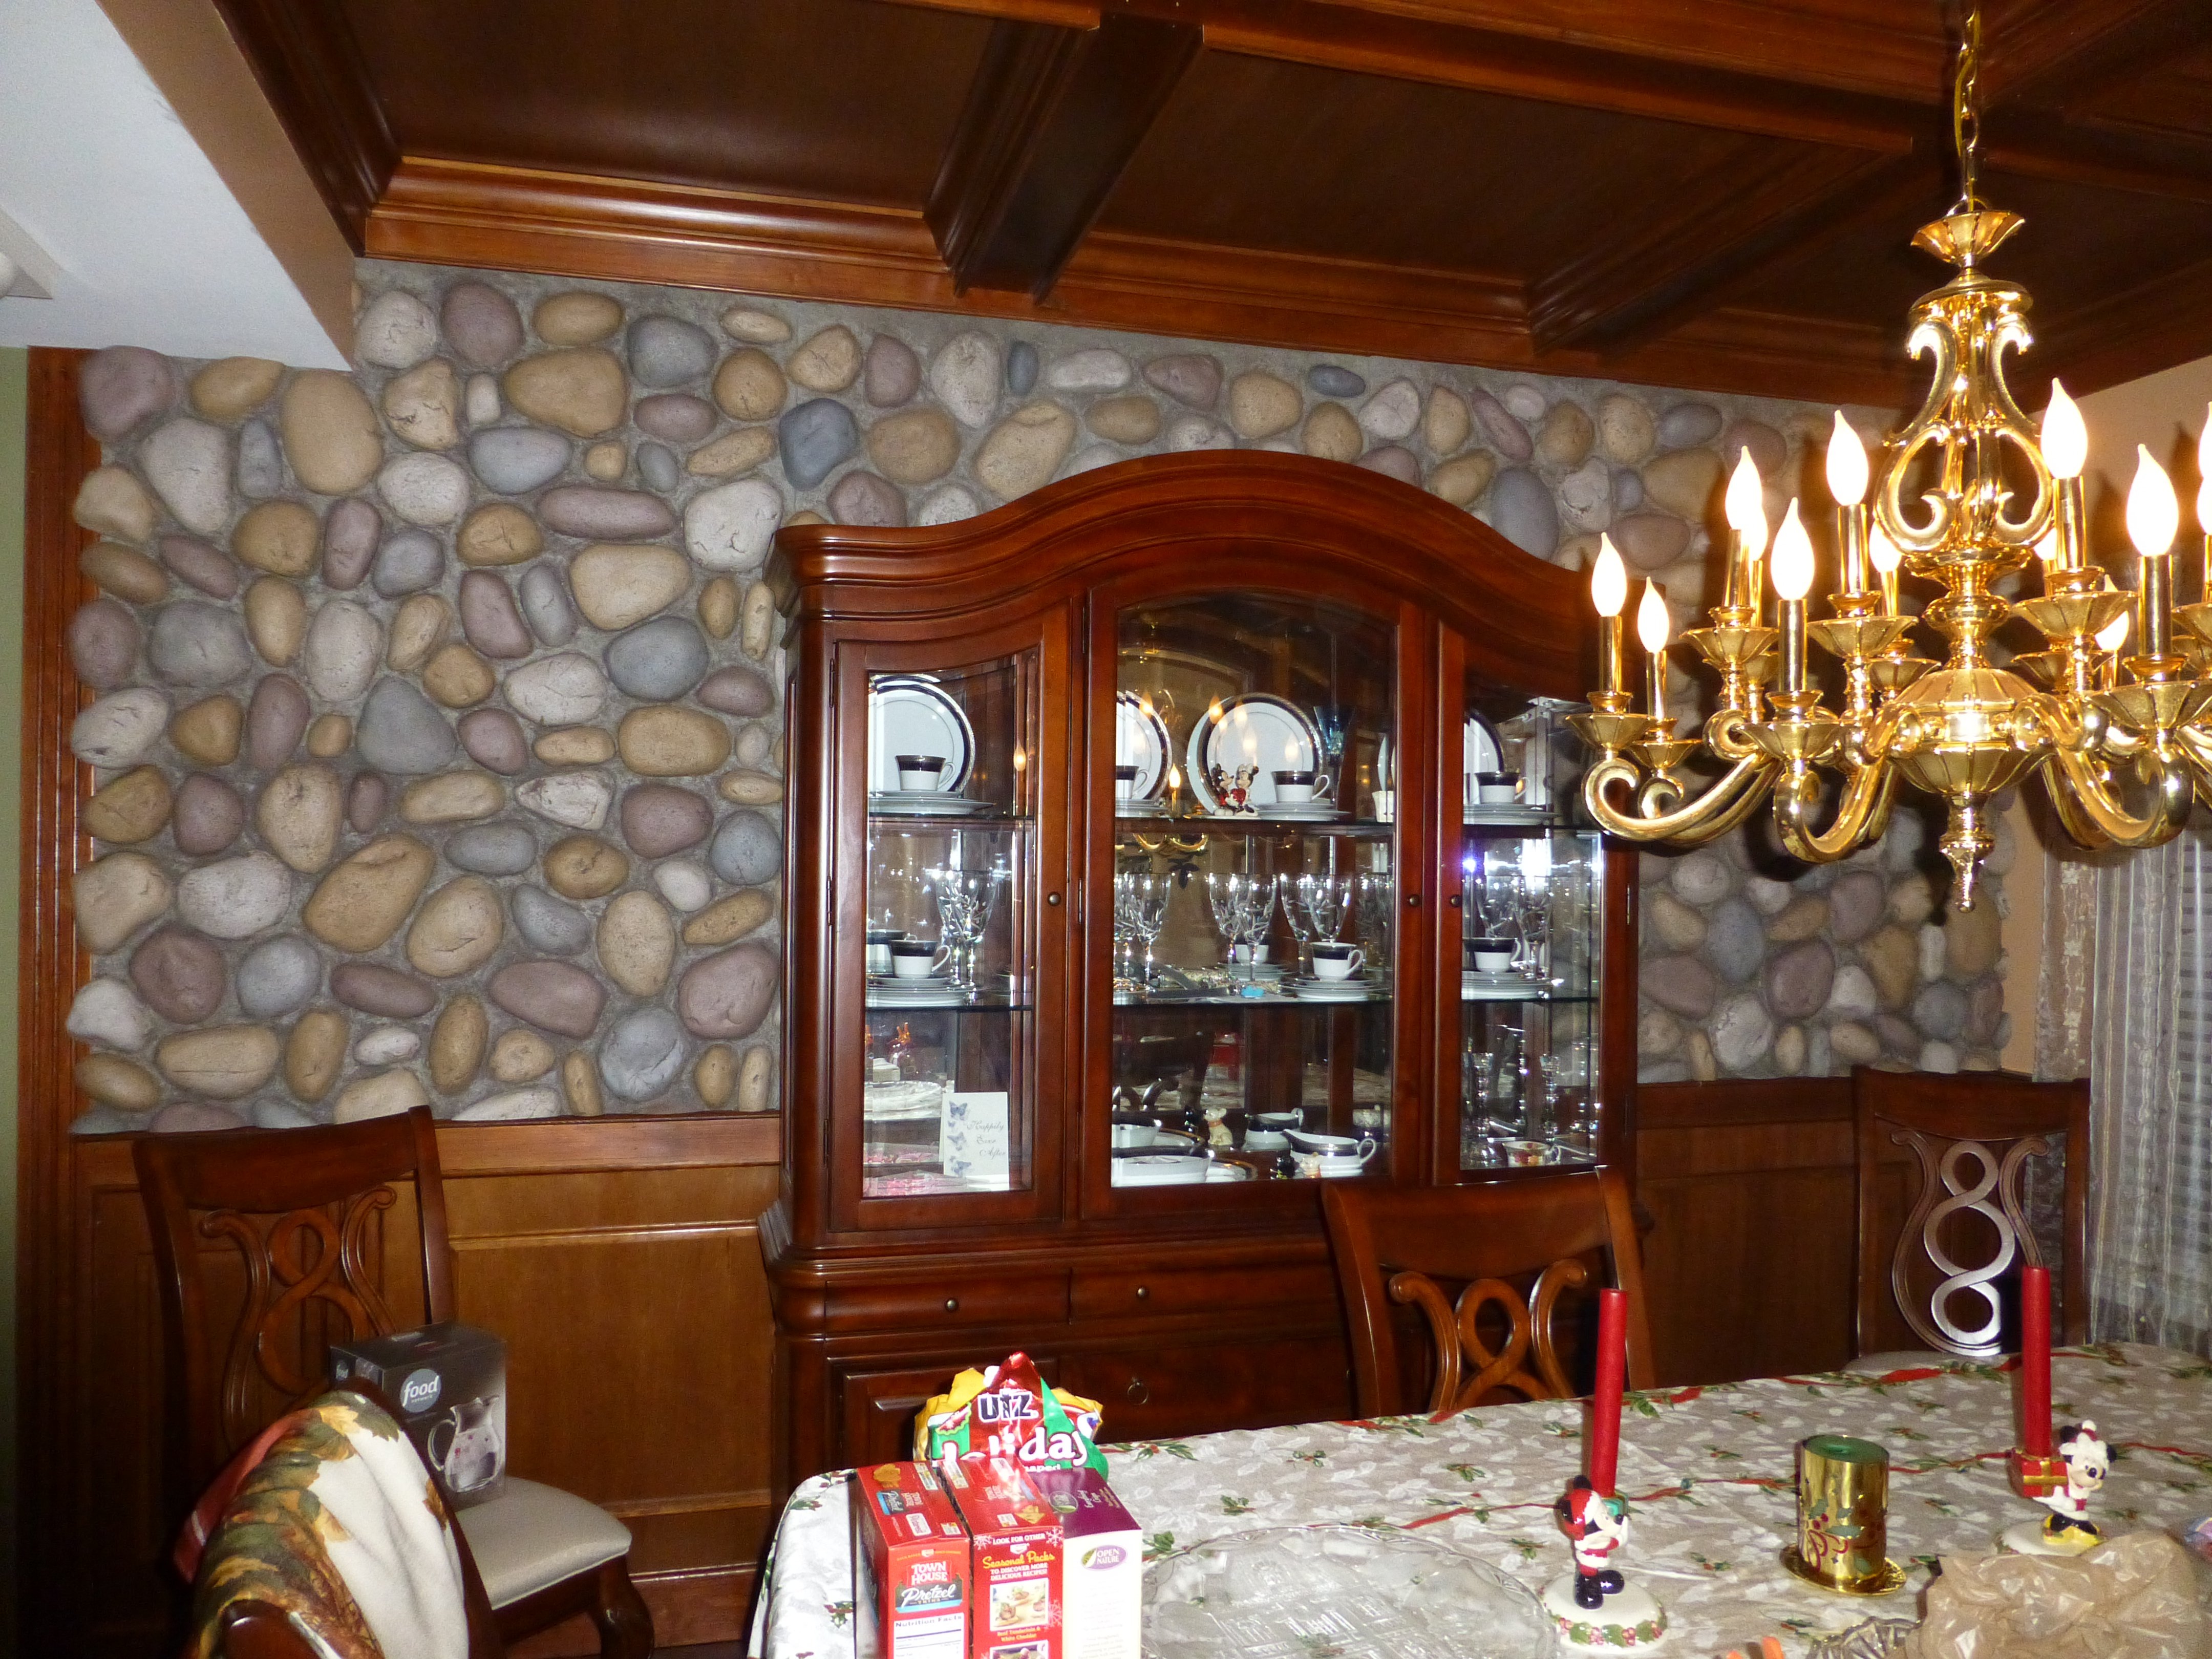 Finished Dining Room Makeover Using River Rock Panels To Create An Eye